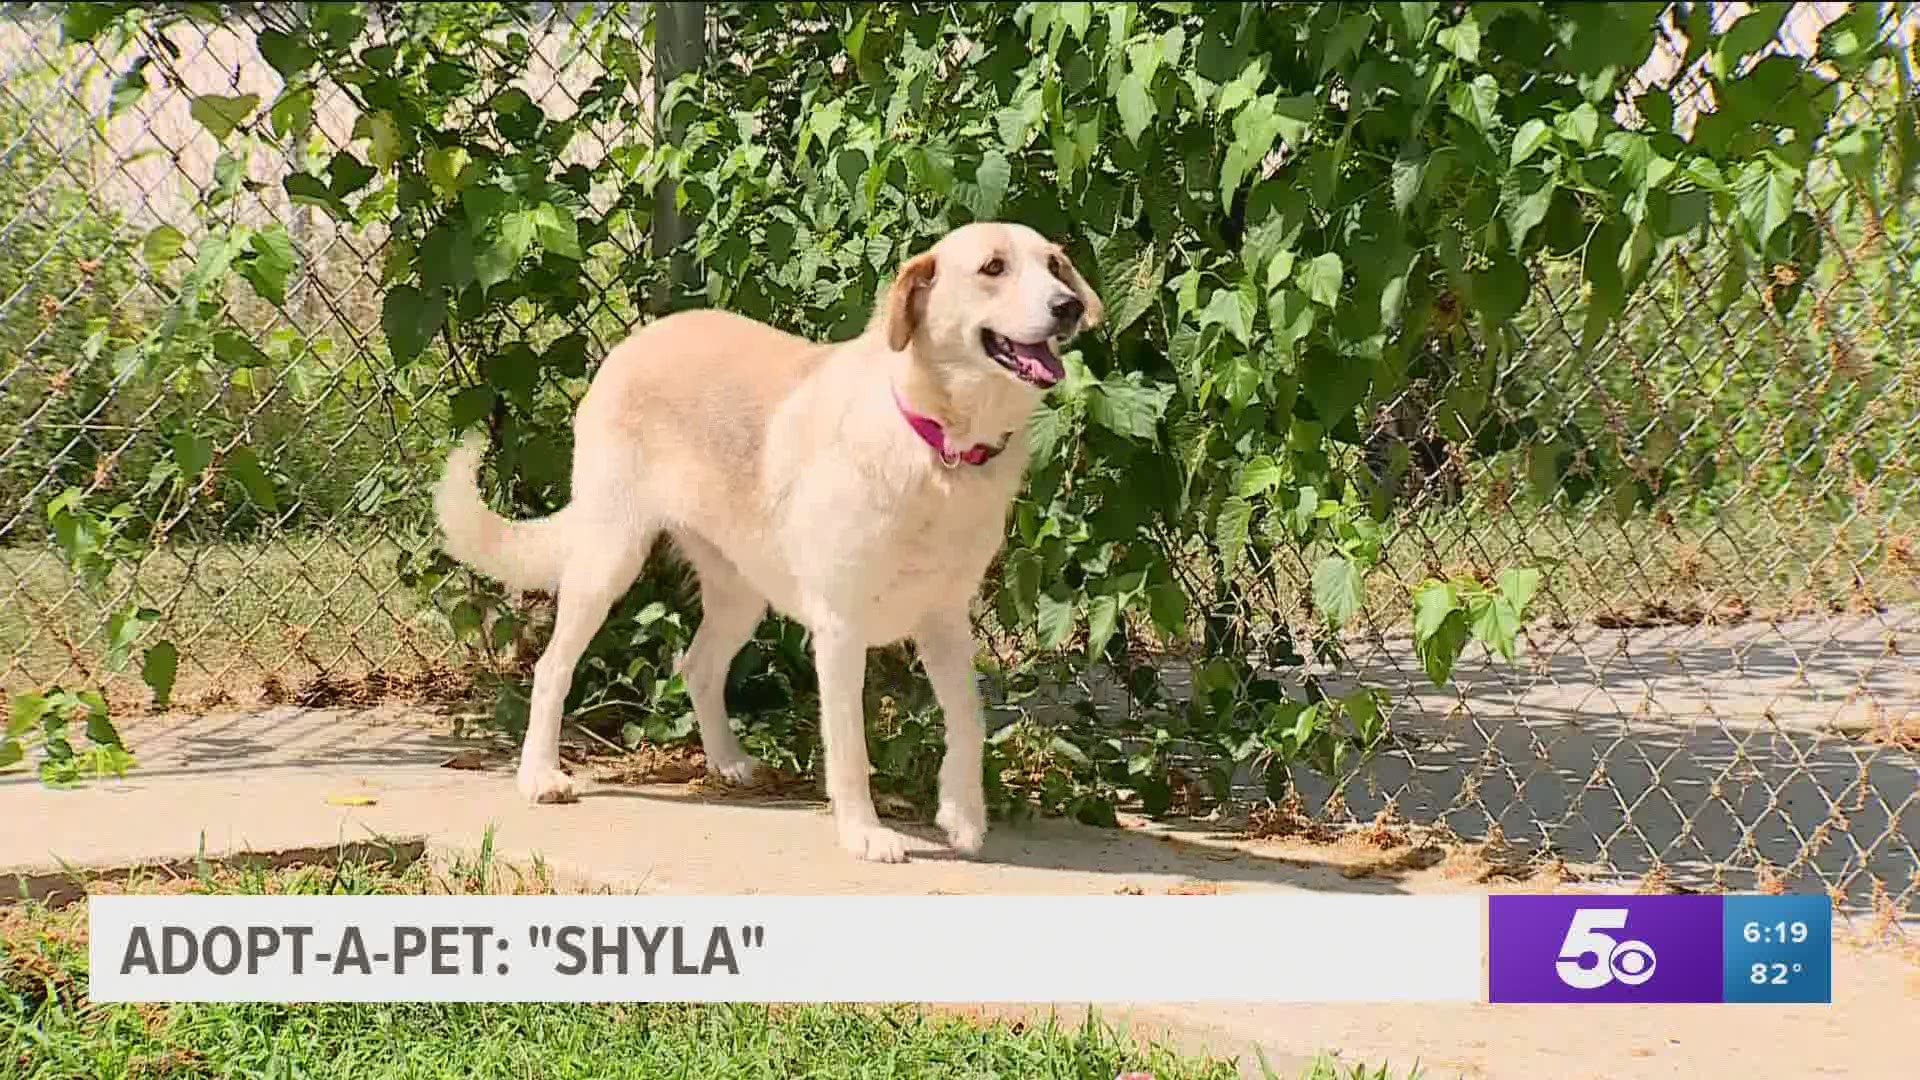 2-year-old Shyla is a Pyrenees-mix that came to the shelter as an owner surrender. https://bit.ly/2WKcyzC